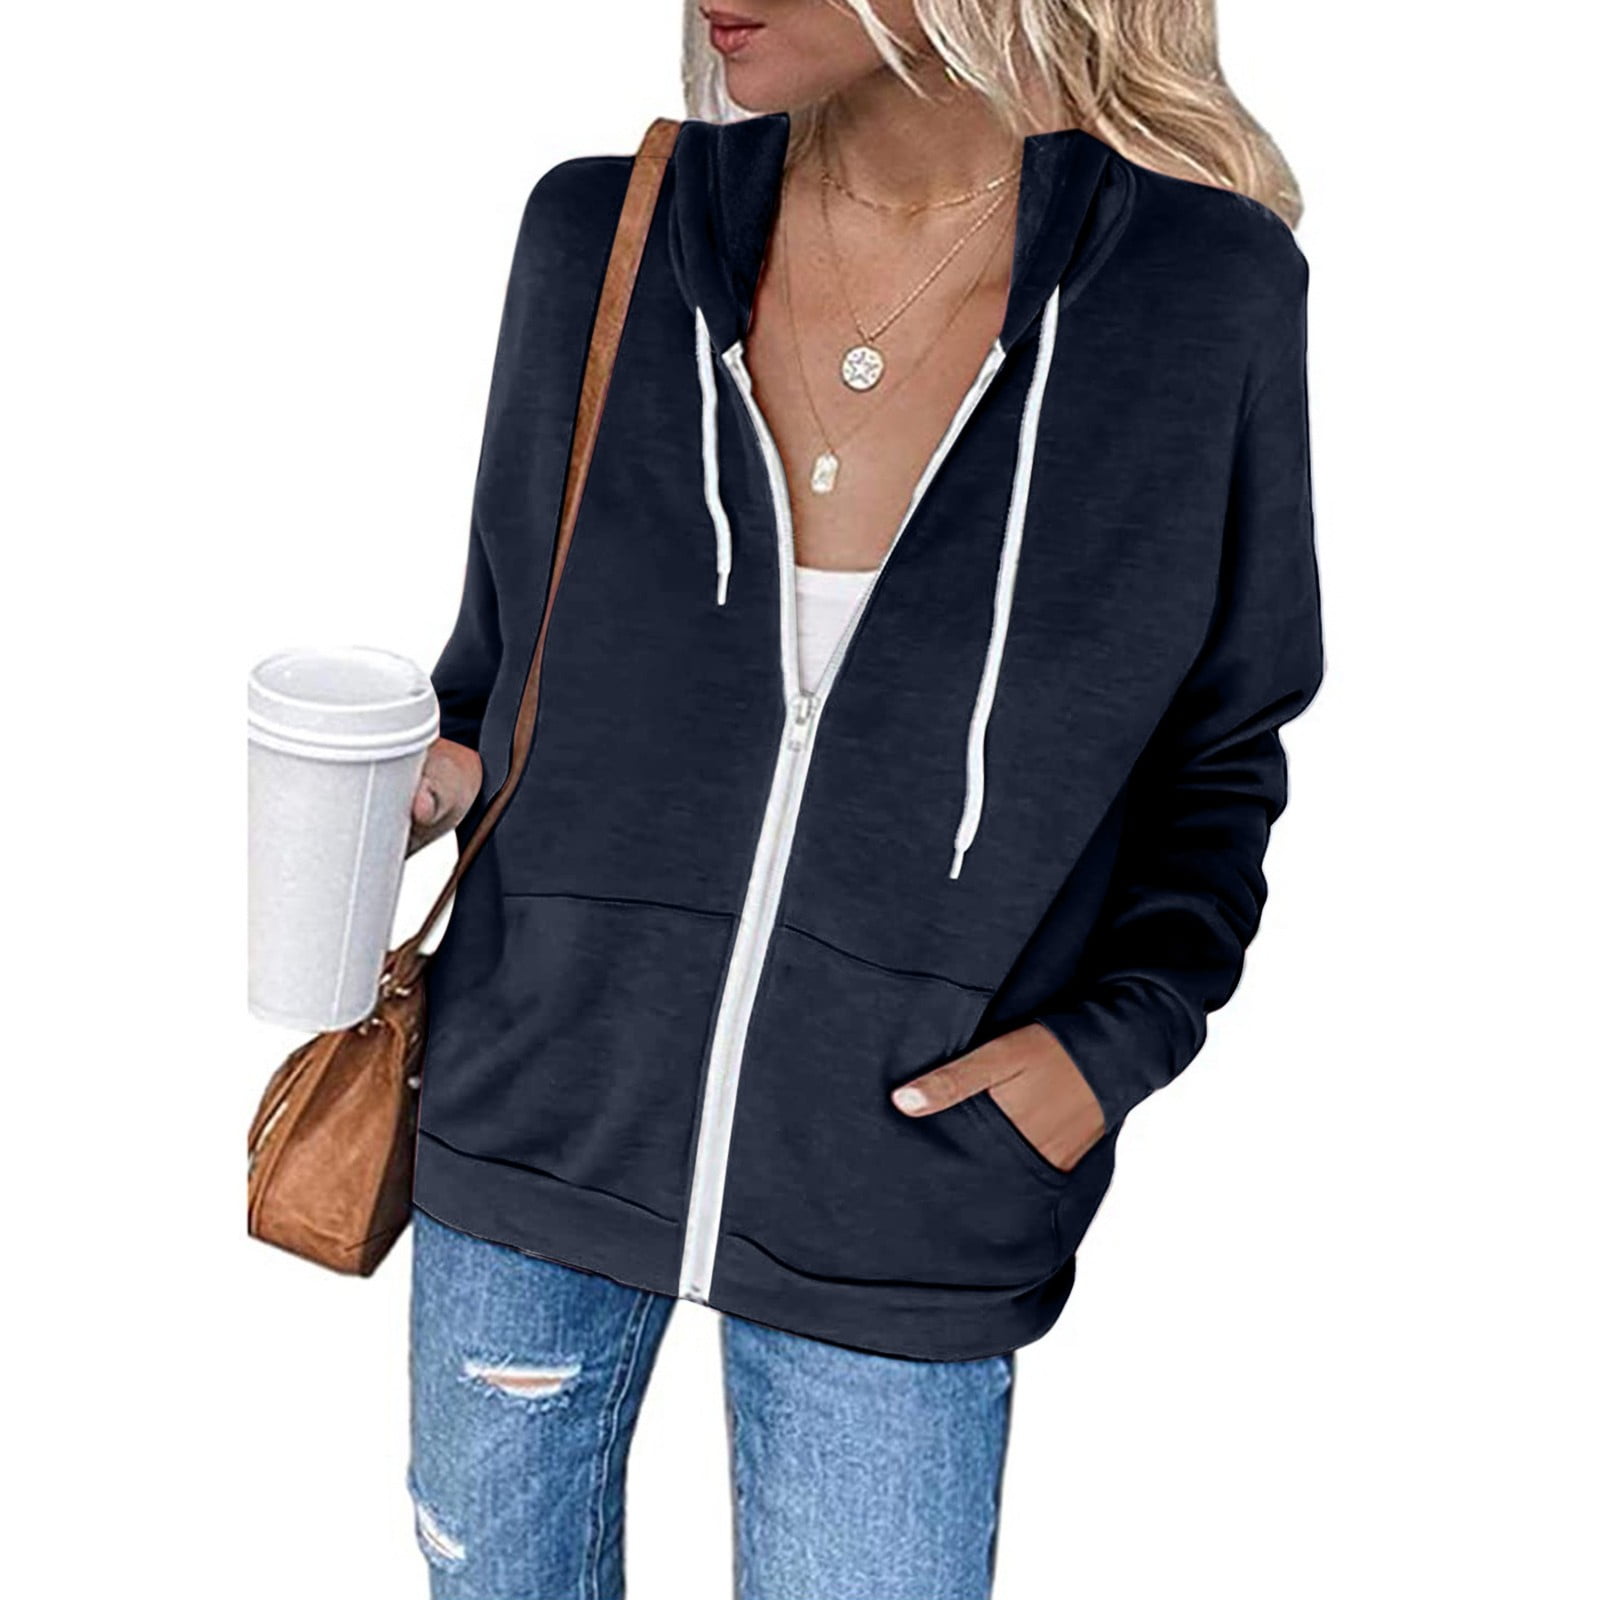 Brilliant Sweater for Women Clearance Fashion Women Casual Hooded Slim ...